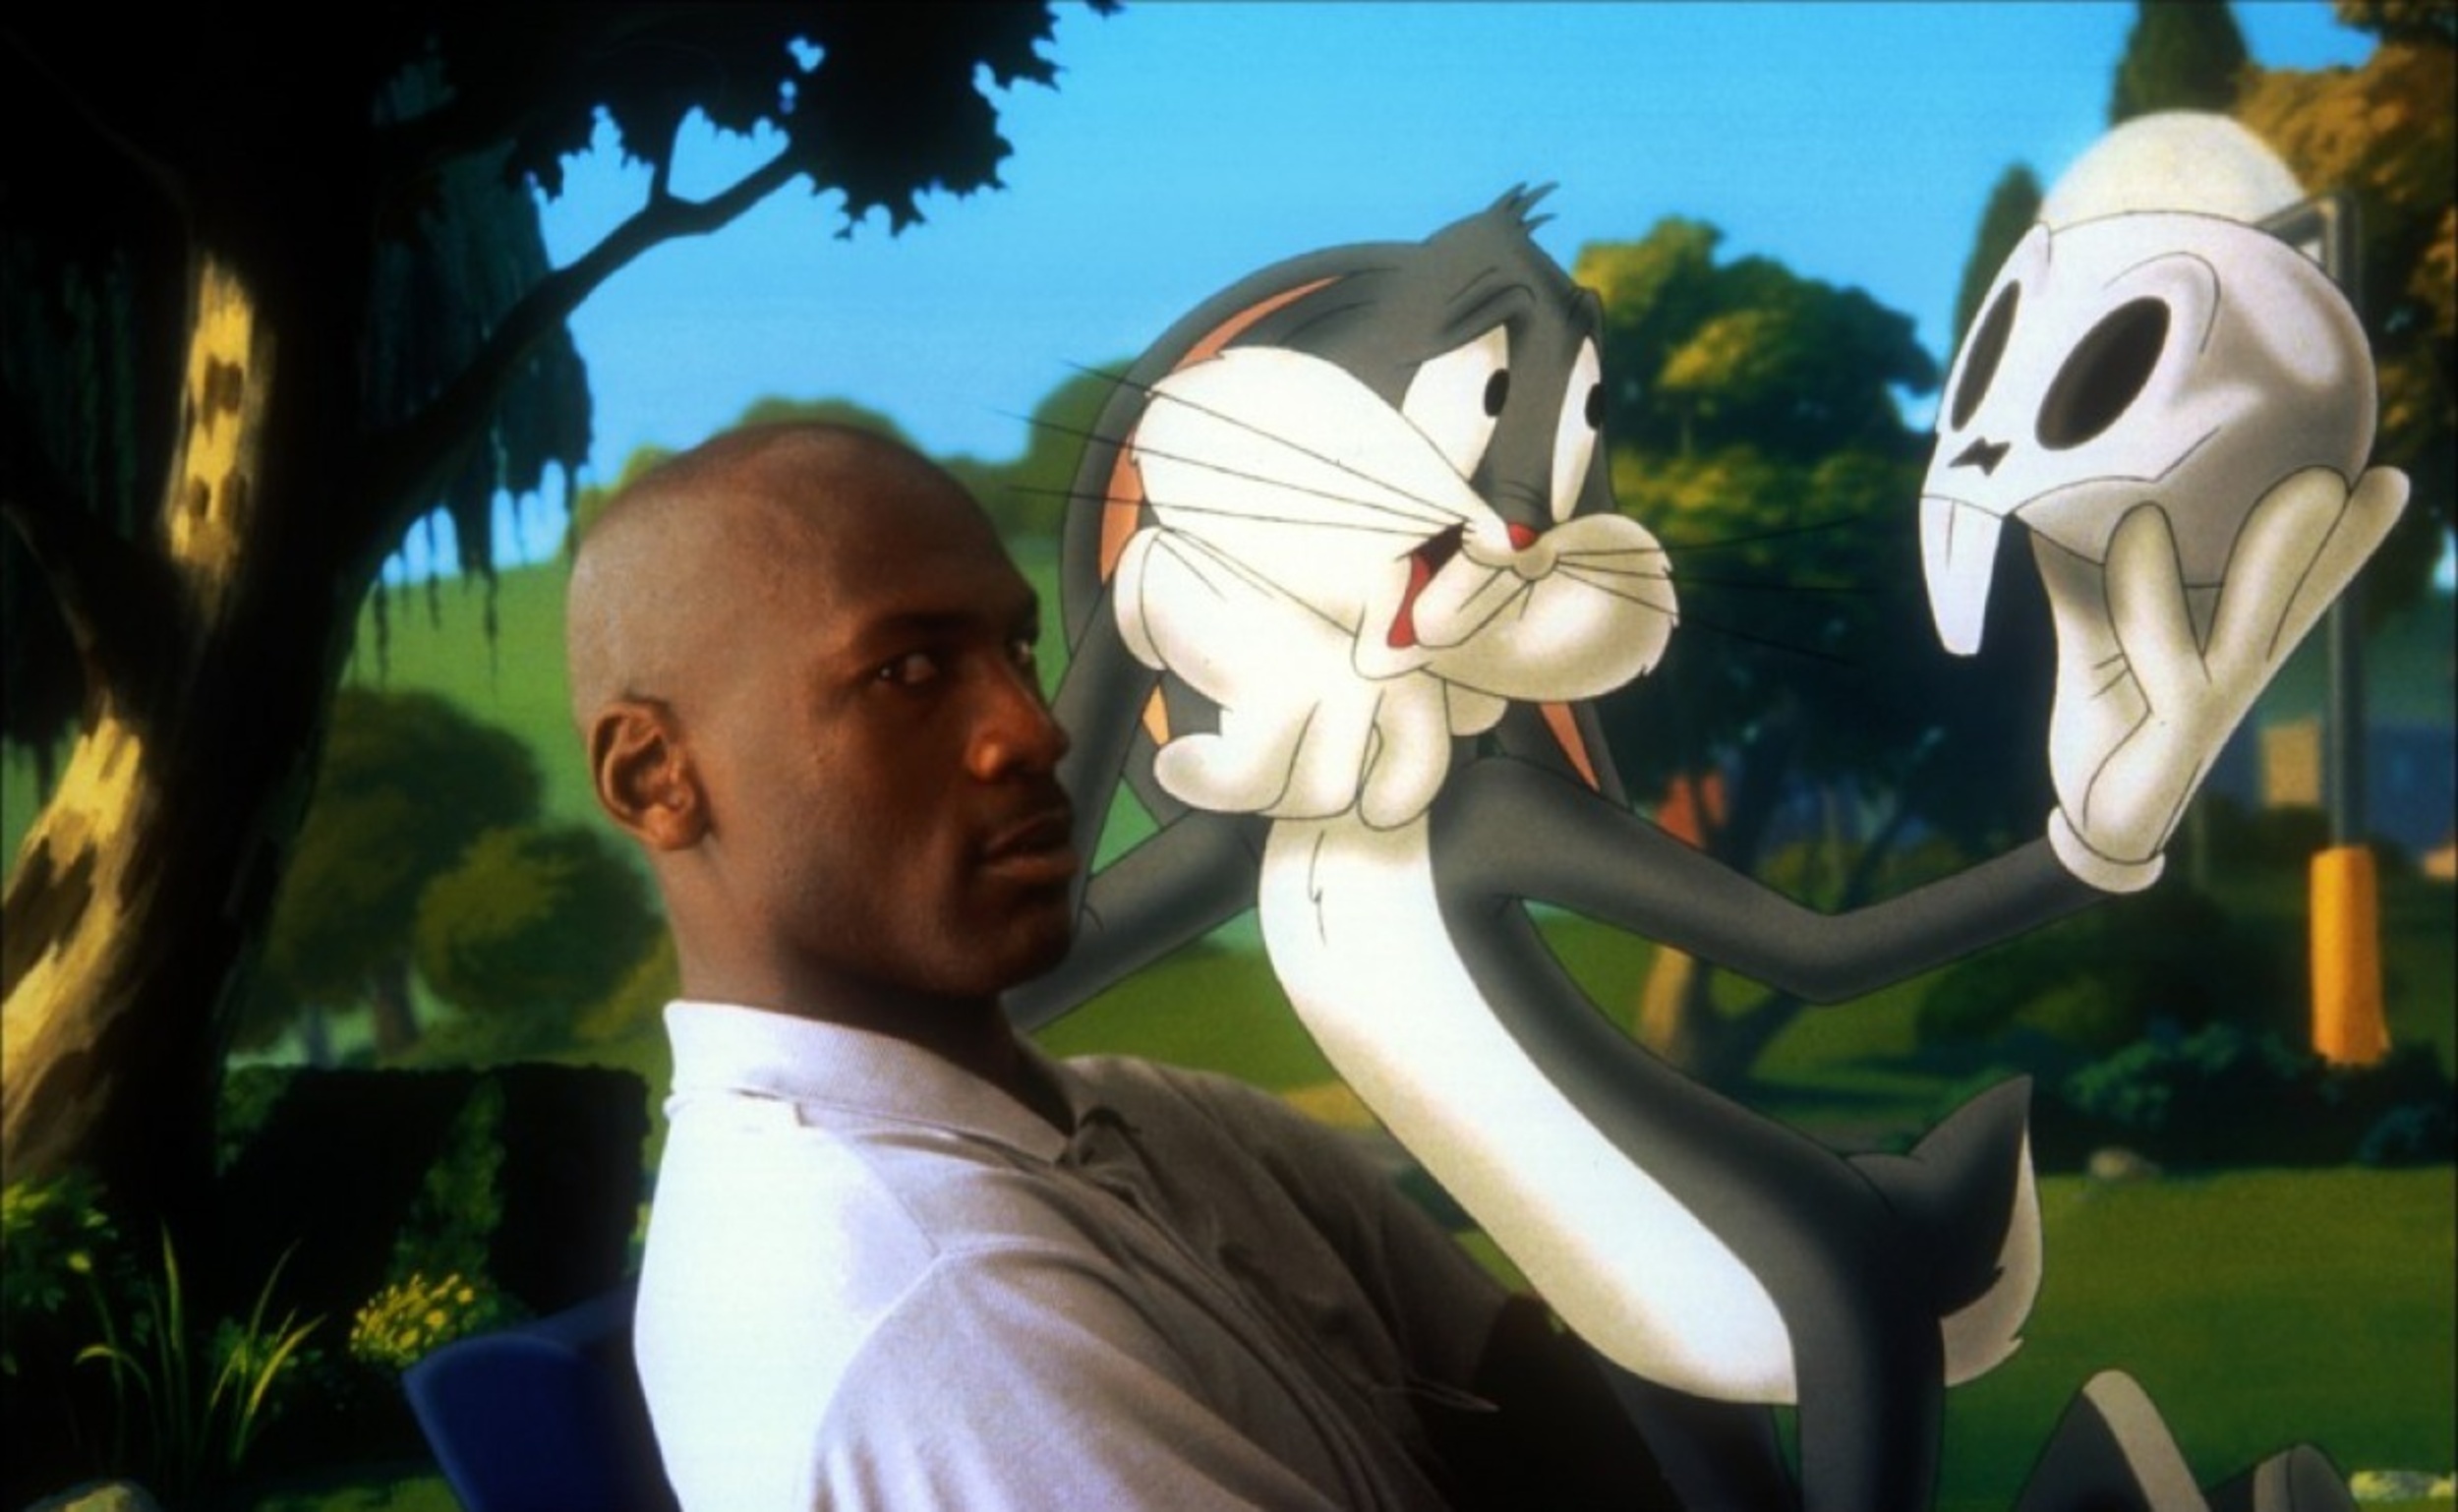 <p><span>When Michael Jordan was enlisted to save the Looney Tunes using his basketball skills, a sports moment in history and cinema was born.</span></p><p><a href='https://www.msn.com/en-us/community/channel/vid-cj9pqbr0vn9in2b6ddcd8sfgpfq6x6utp44fssrv6mc2gtybw0us'>Follow us on MSN to see more of our exclusive entertainment content.</a></p>